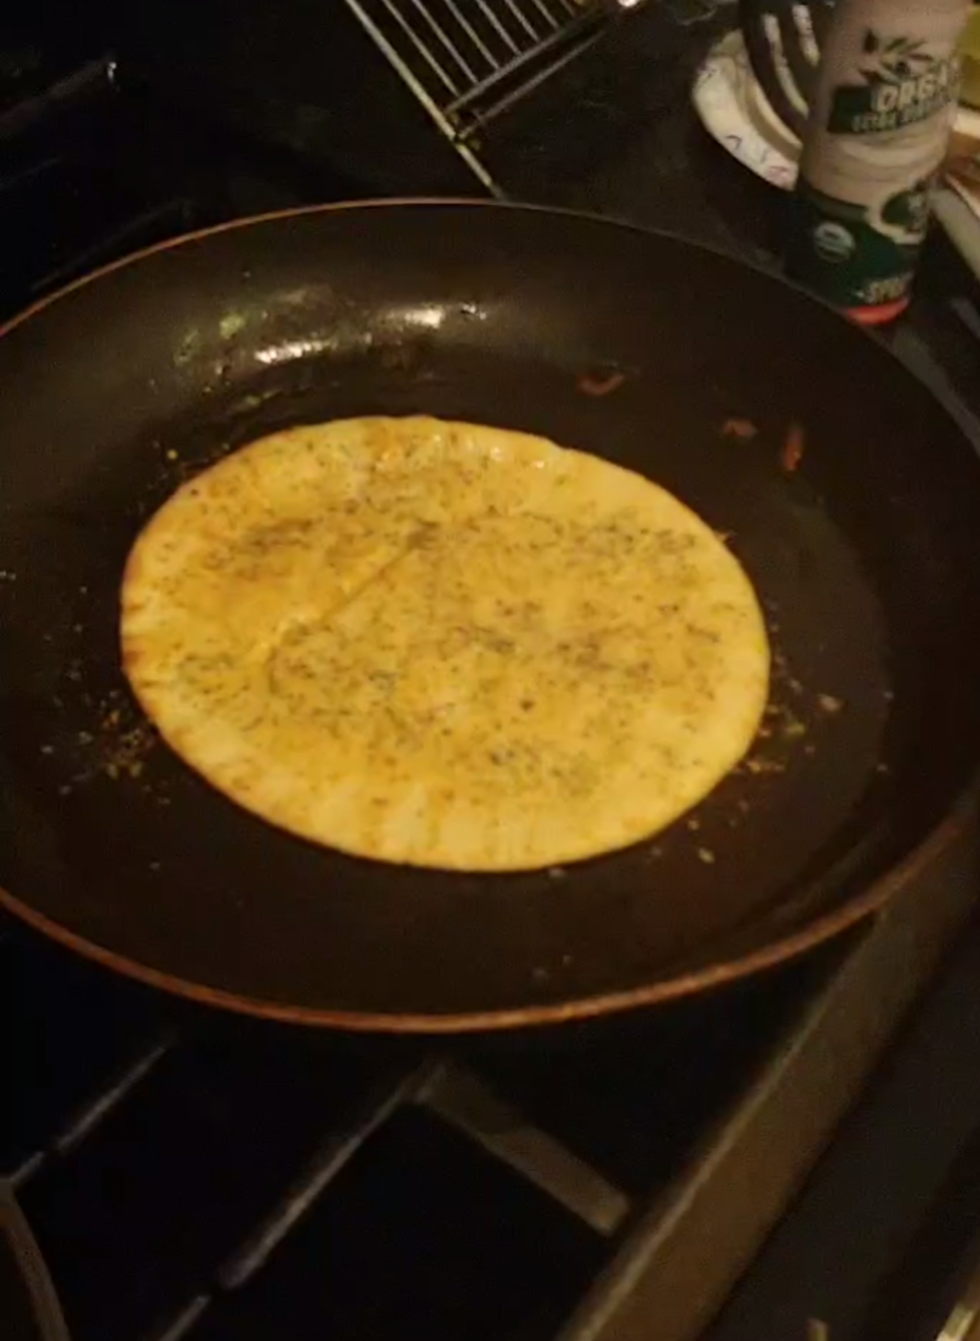 Pita bread cooking on stove